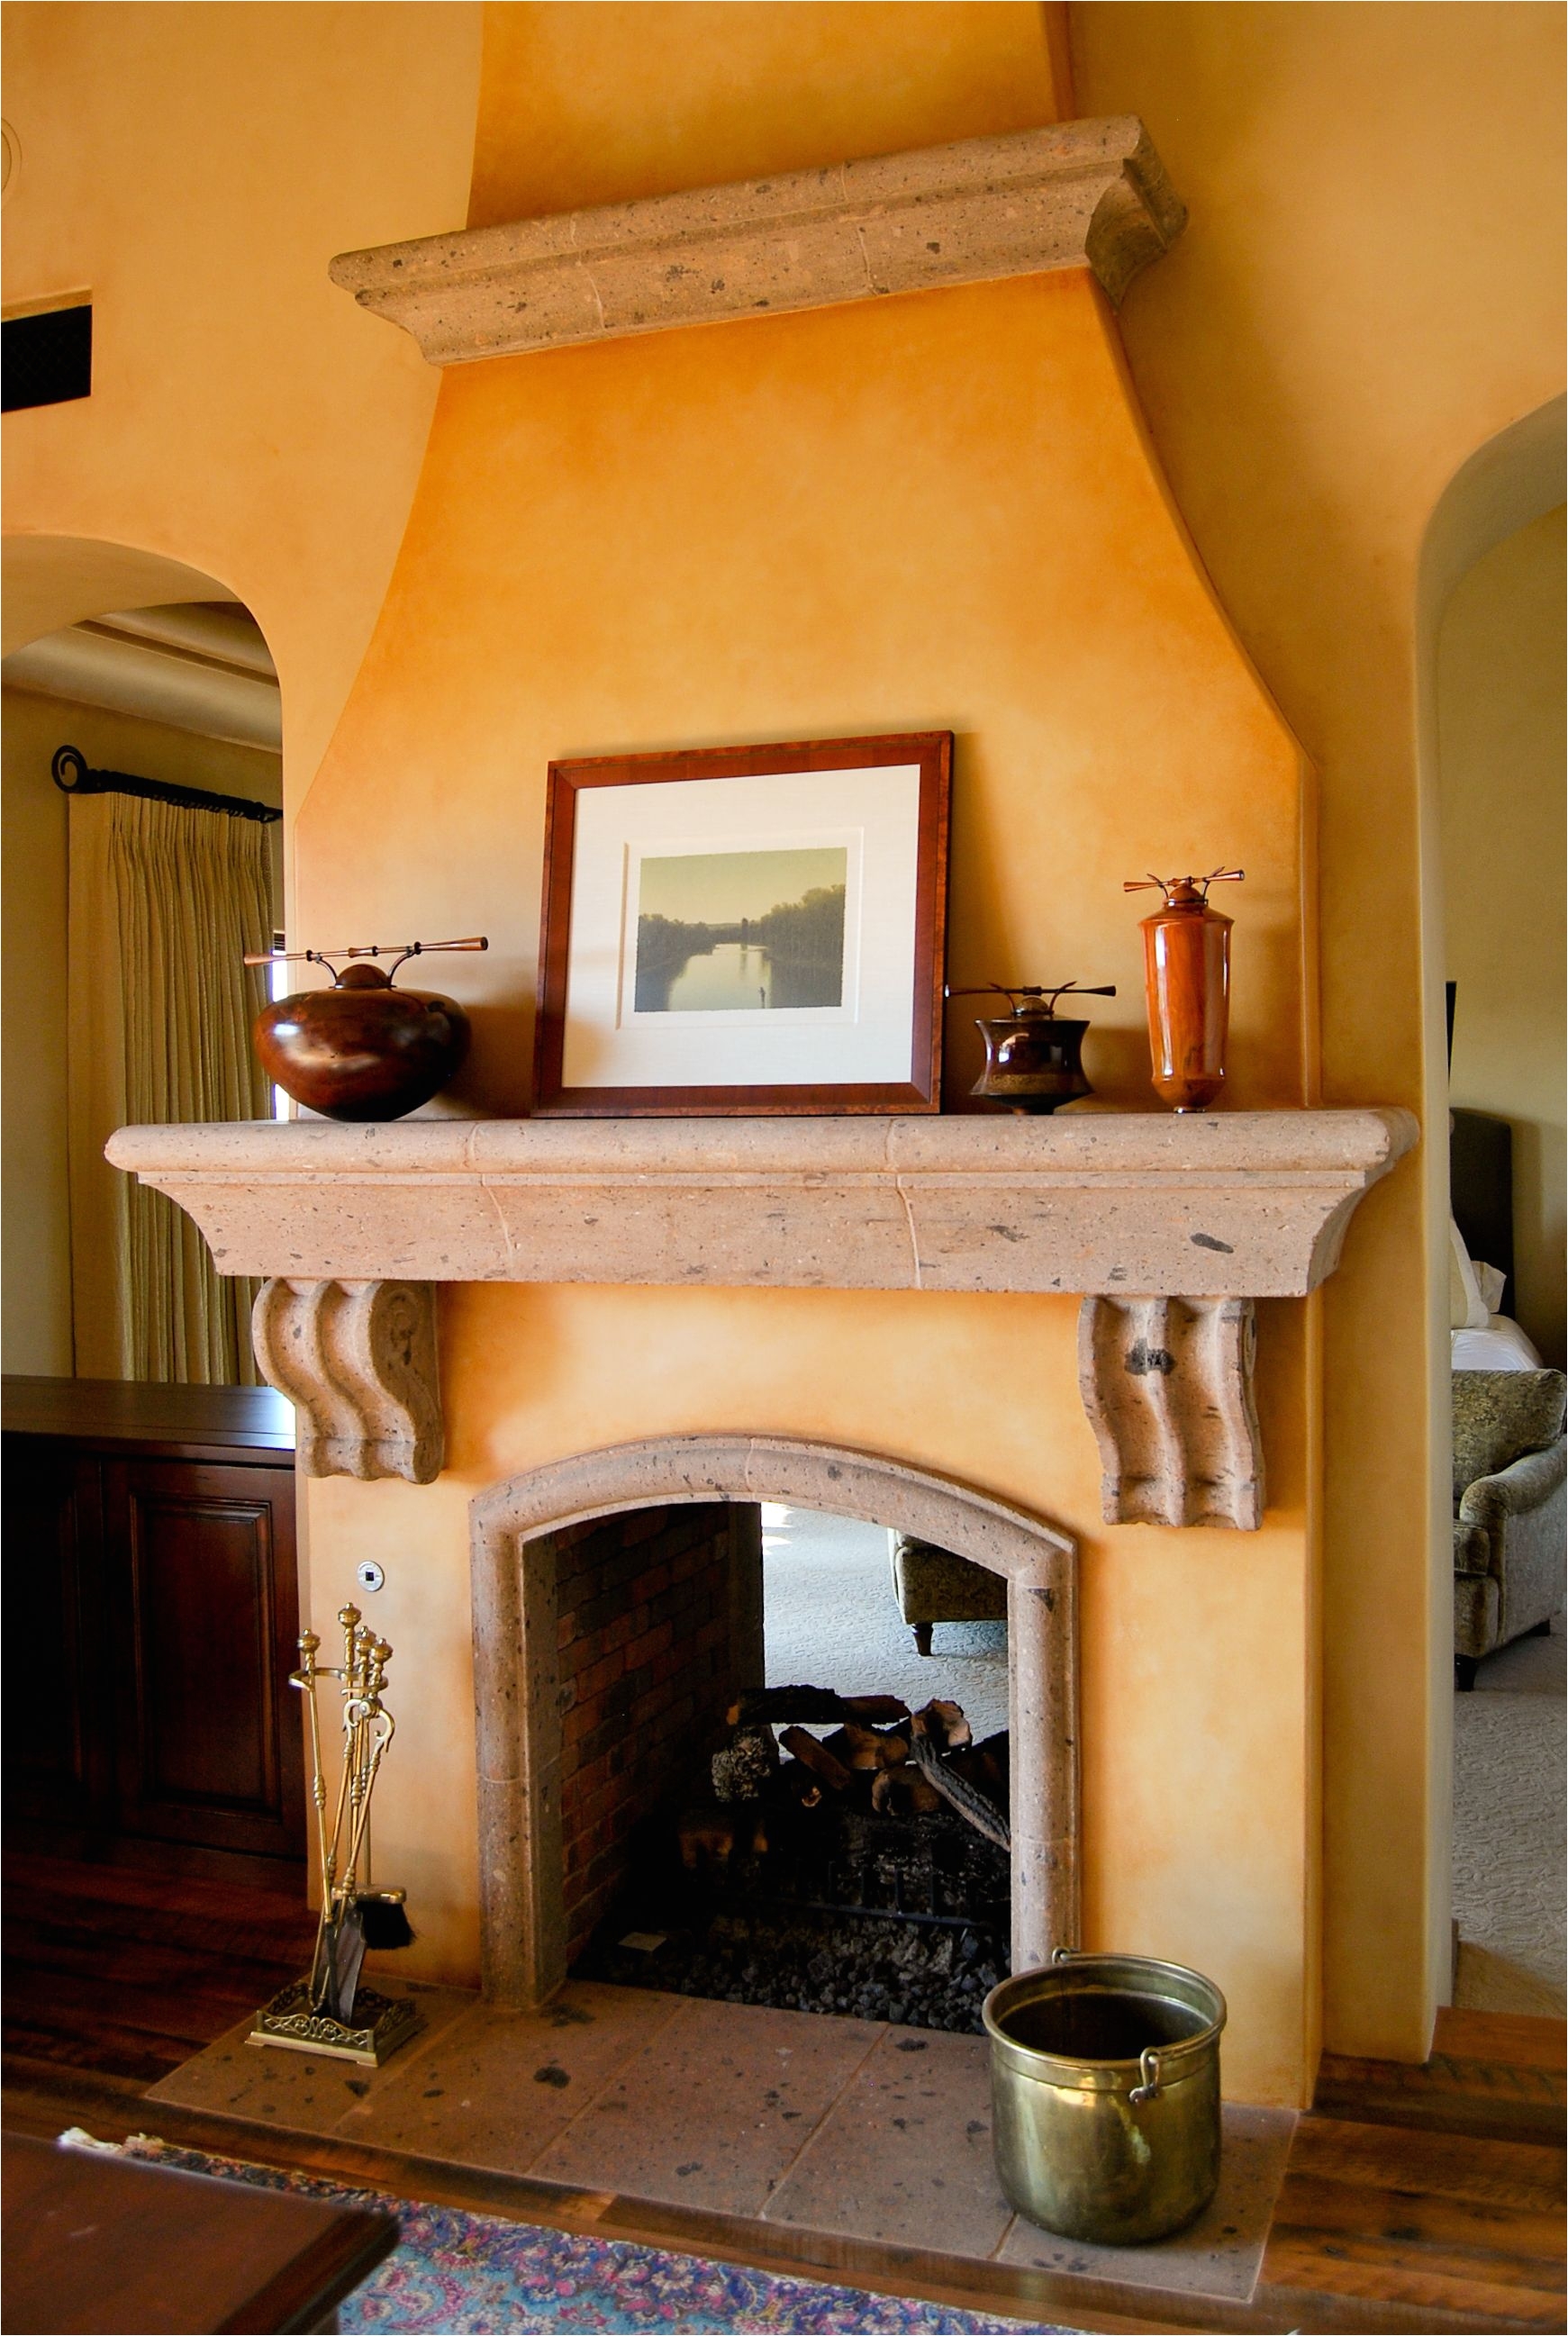 spanish style molding at top of fireplace